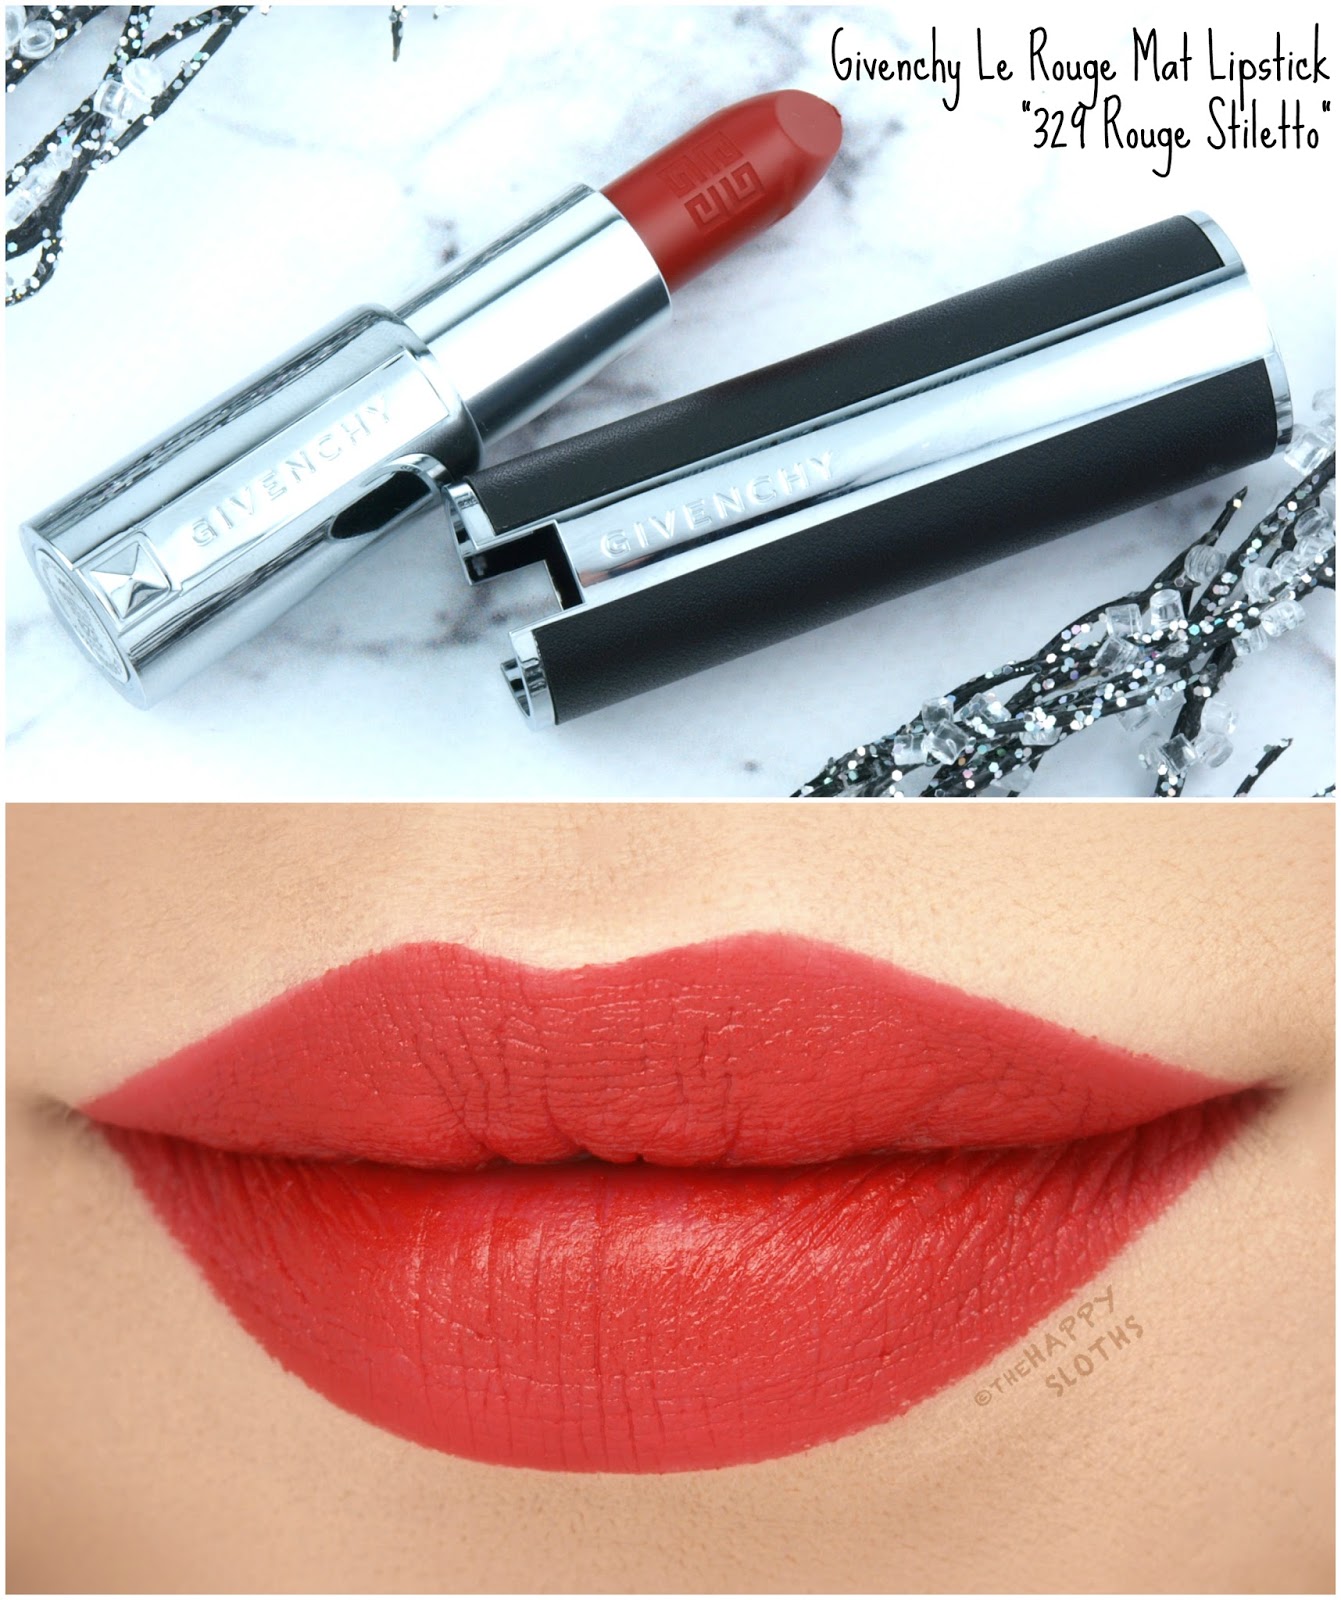 Givenchy | NEW Le Rouge Mat Lipstick in "329 Rouge Stiletto": Review and Swatches